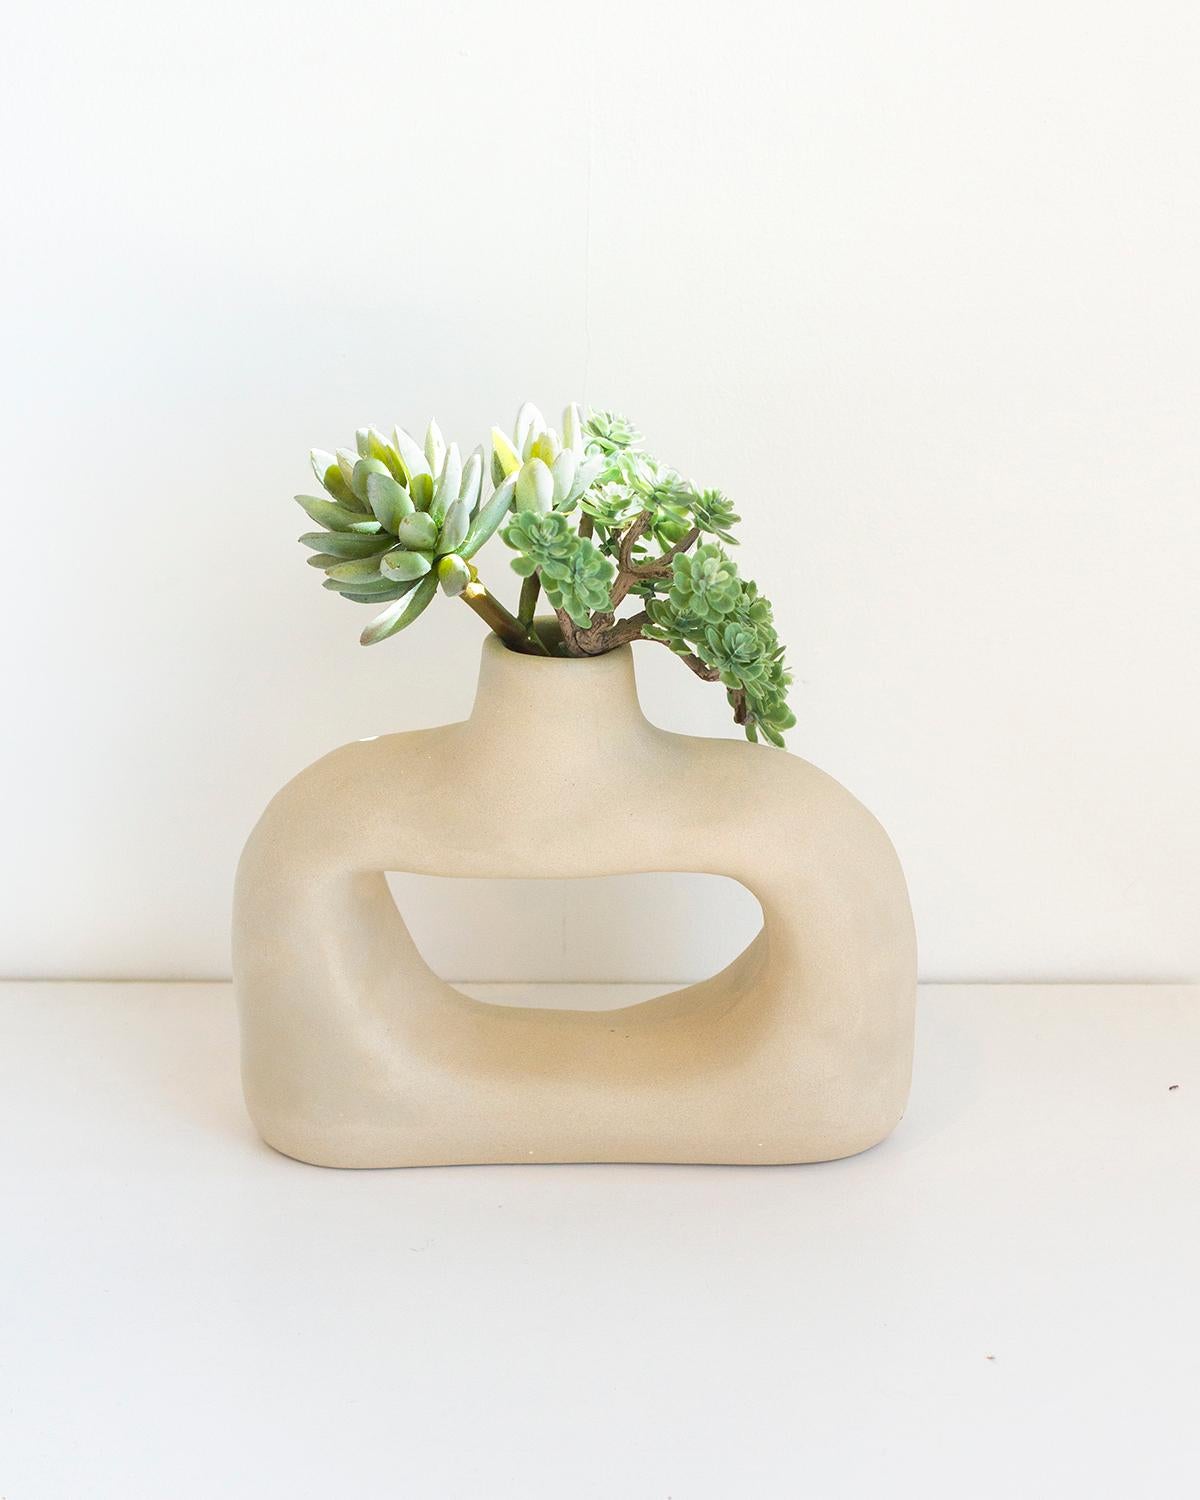 This Nook Clay Vase is a timeless piece crafted with natural white clay. Handmade from natural materials with a rustic and sculptural shape, it offers an organic modern look that embodies a minimalist and quiet luxury aesthetic perfect for any home